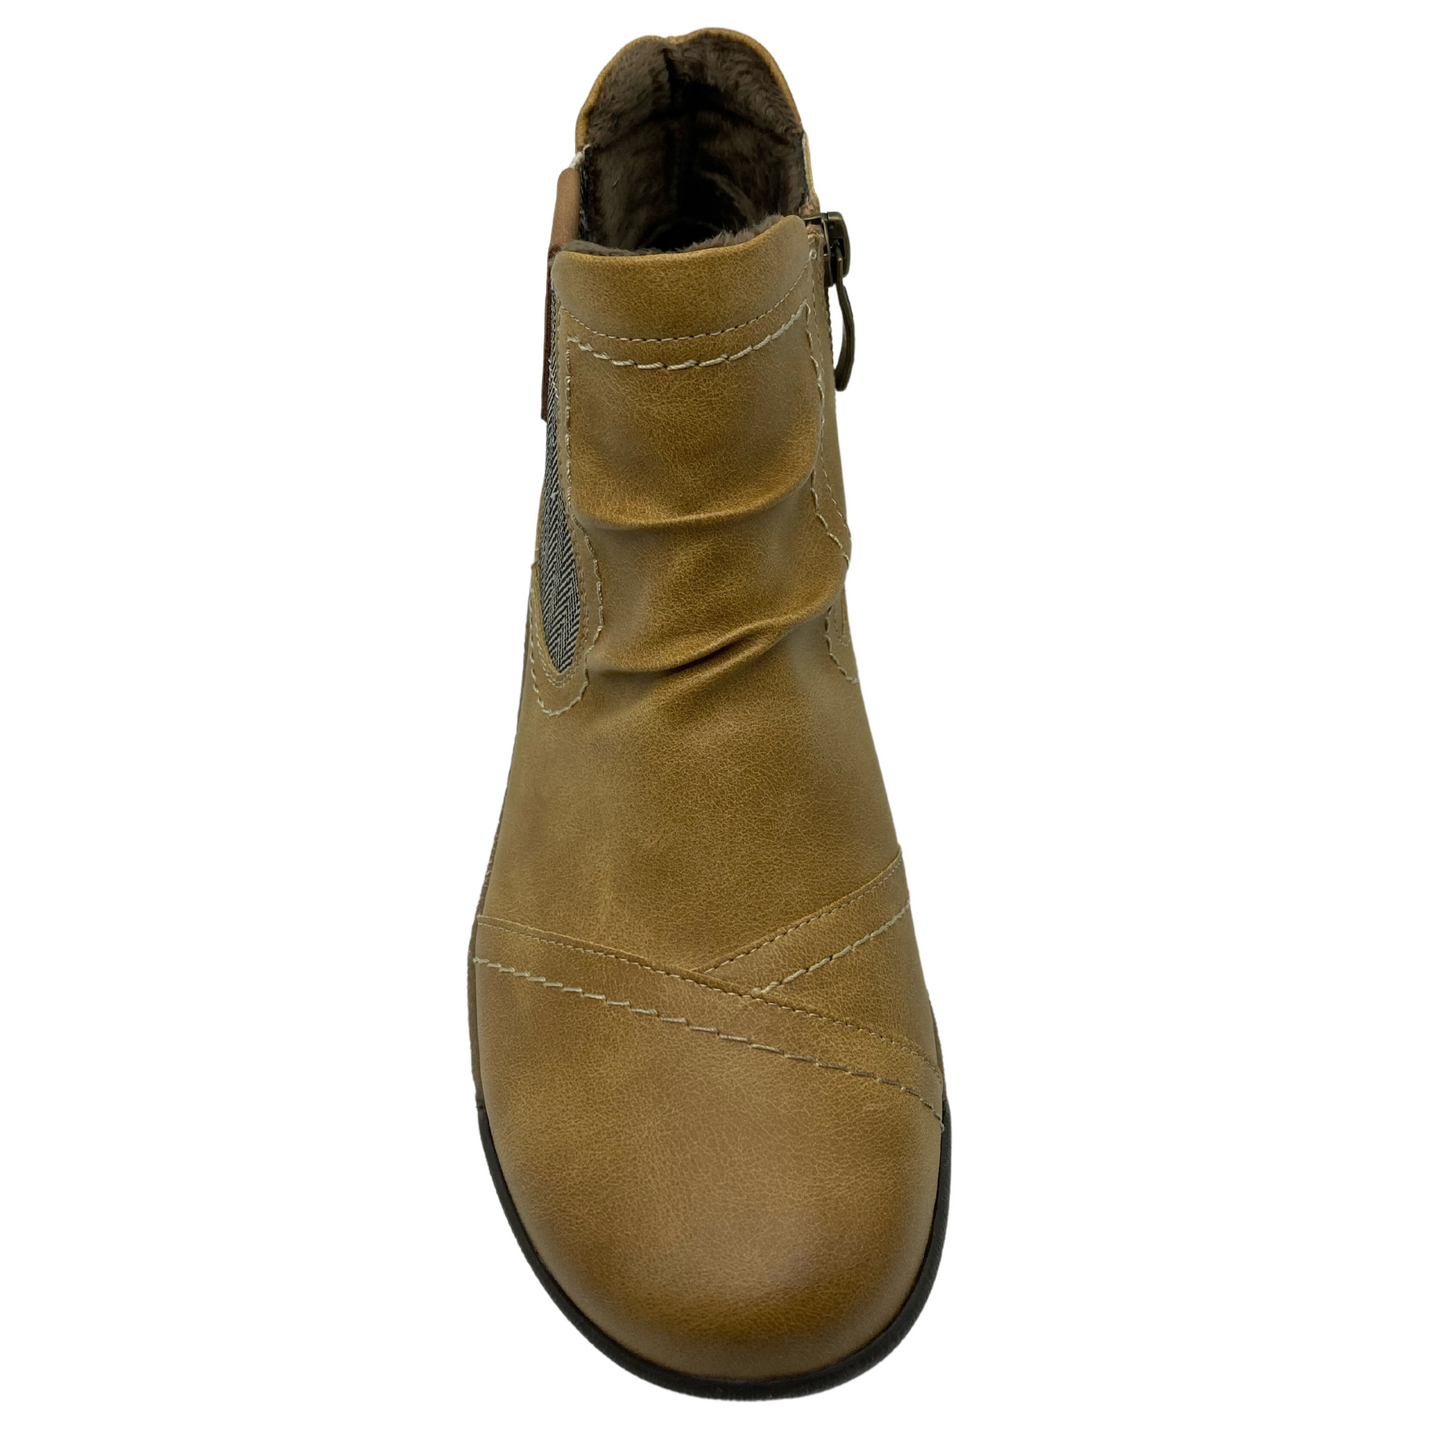 Top view of mustard short boot with rounded toe , inner side zipper and elastic side gore